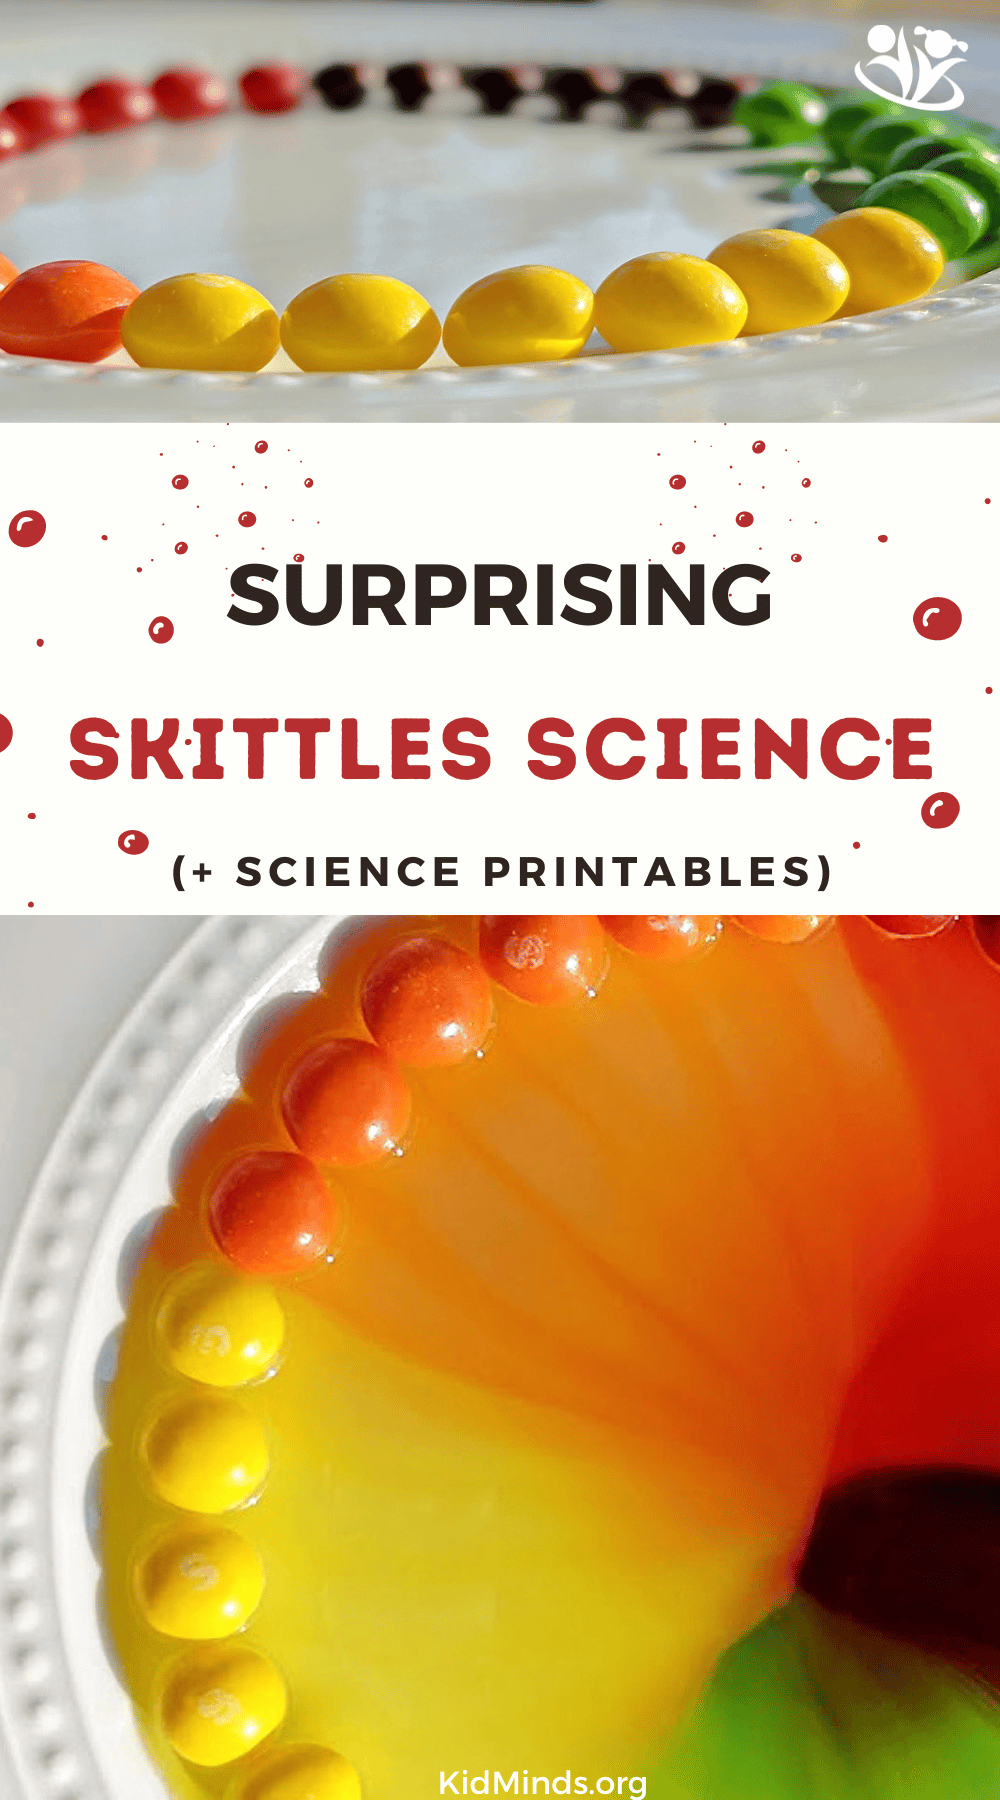 Skittles science activity is bright and beautiful and a real hit with kids! Learn about dissolving, diffusion, and stratification with candy. Scroll down to the science section to download your FREE science printables. #kidsactivities #STEM #laughingkidslearn #kidminds #earlyeducation #funwithscience